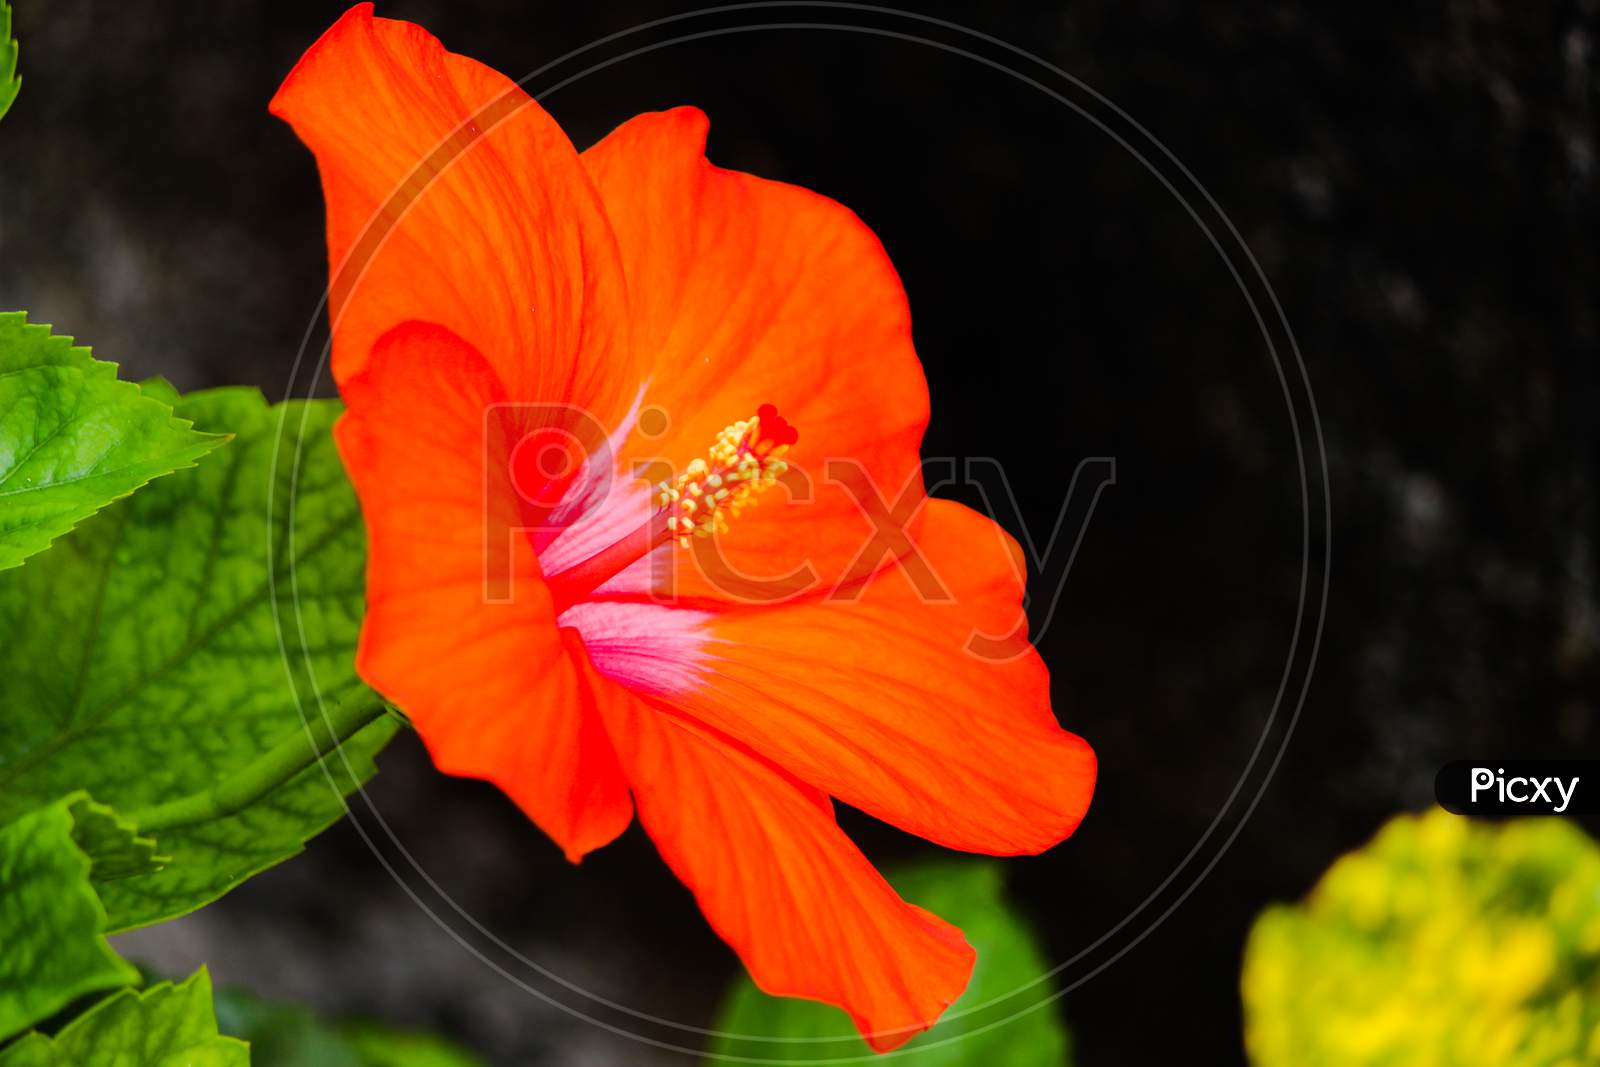 Young,Bright,Pure Orange Flower Shining In The Sun